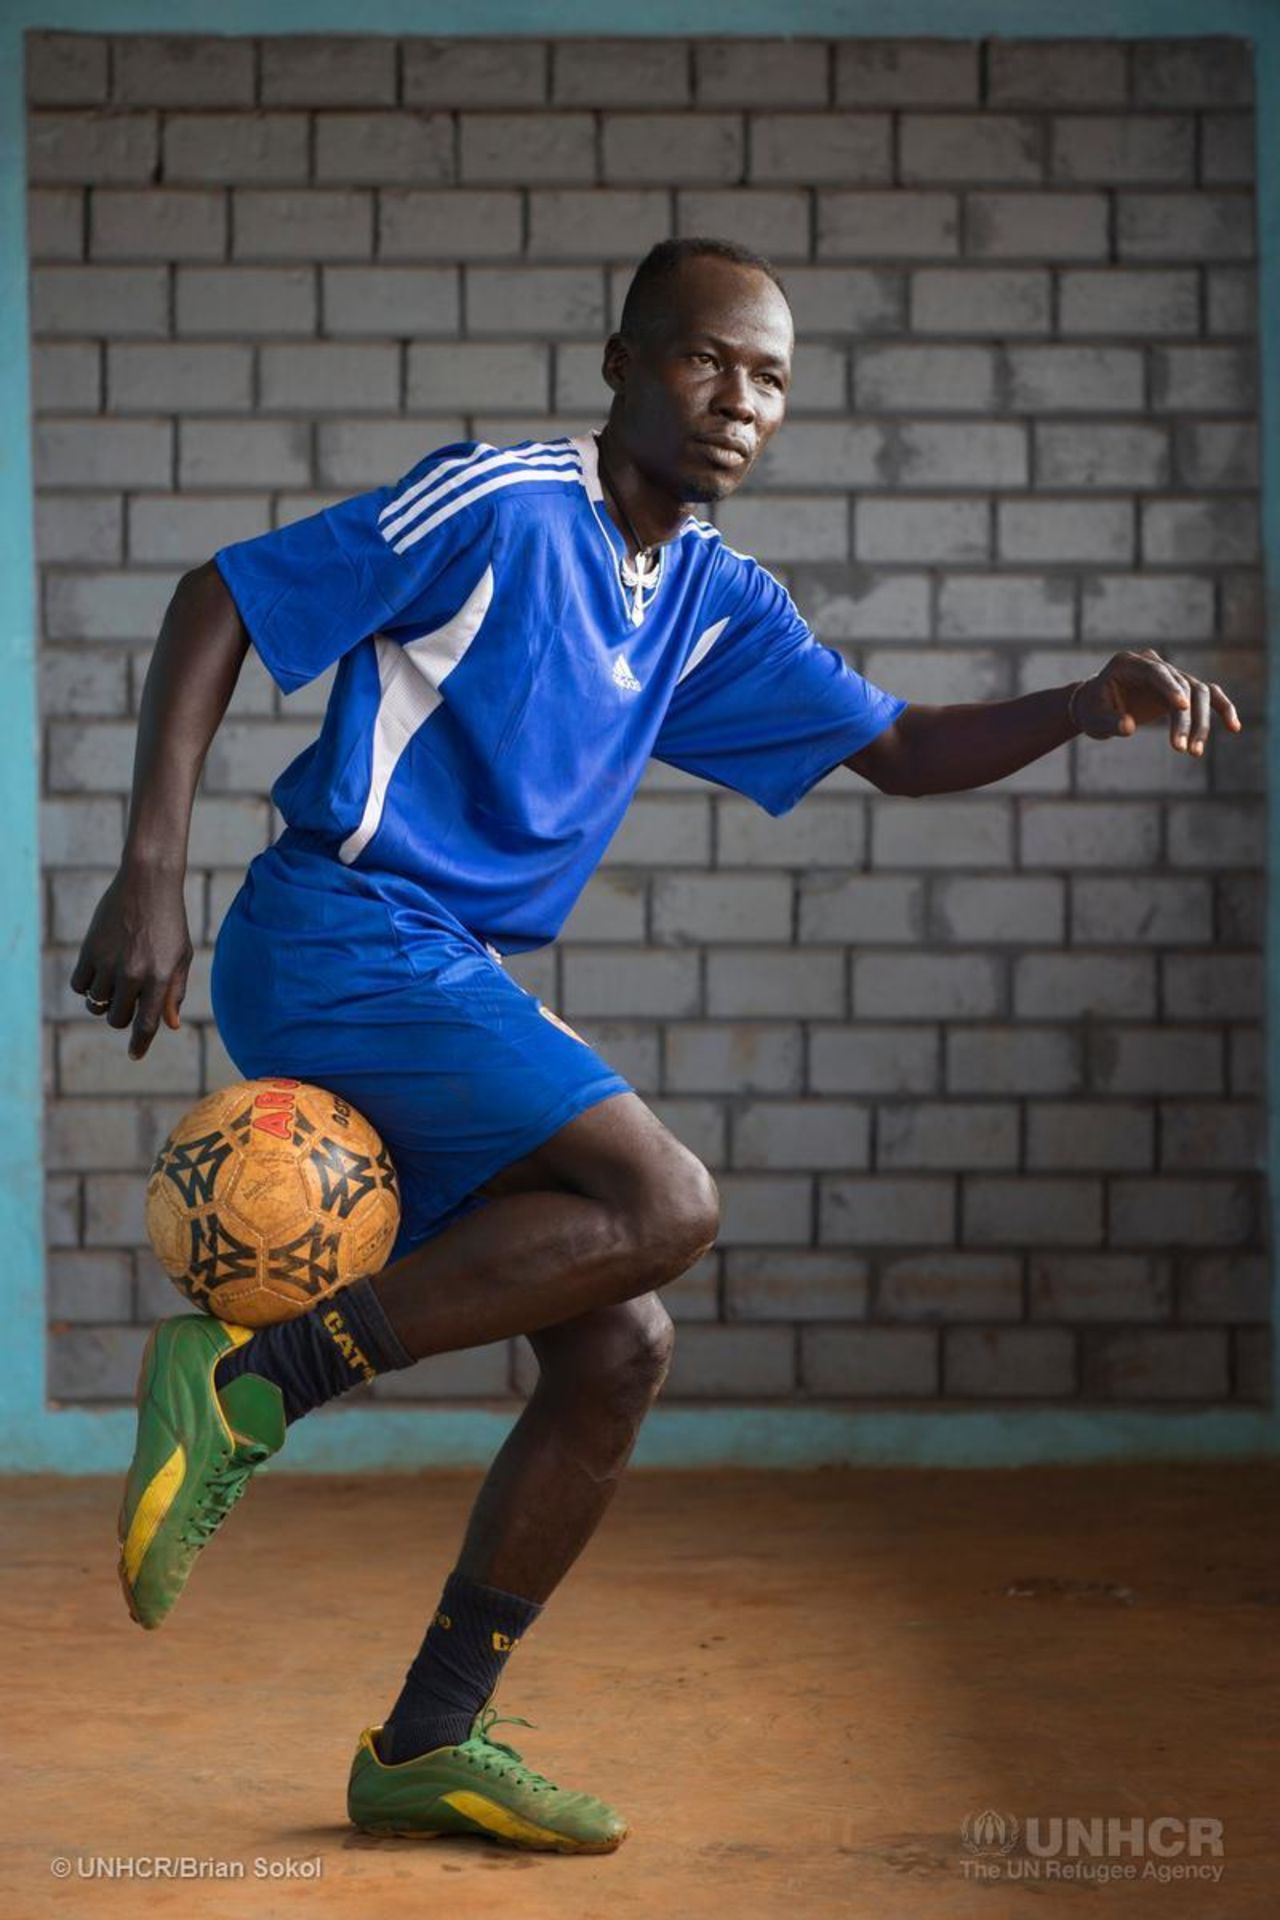 Nantouna  excels at soccer as well as karate. He used to play for the team DFC8, playing with international stars like Foxi Kethevoama. <br /><br />"My dream is to continue my sports practice," he says. "I want to become like Didier Drogba and Samuel Eto'o." 